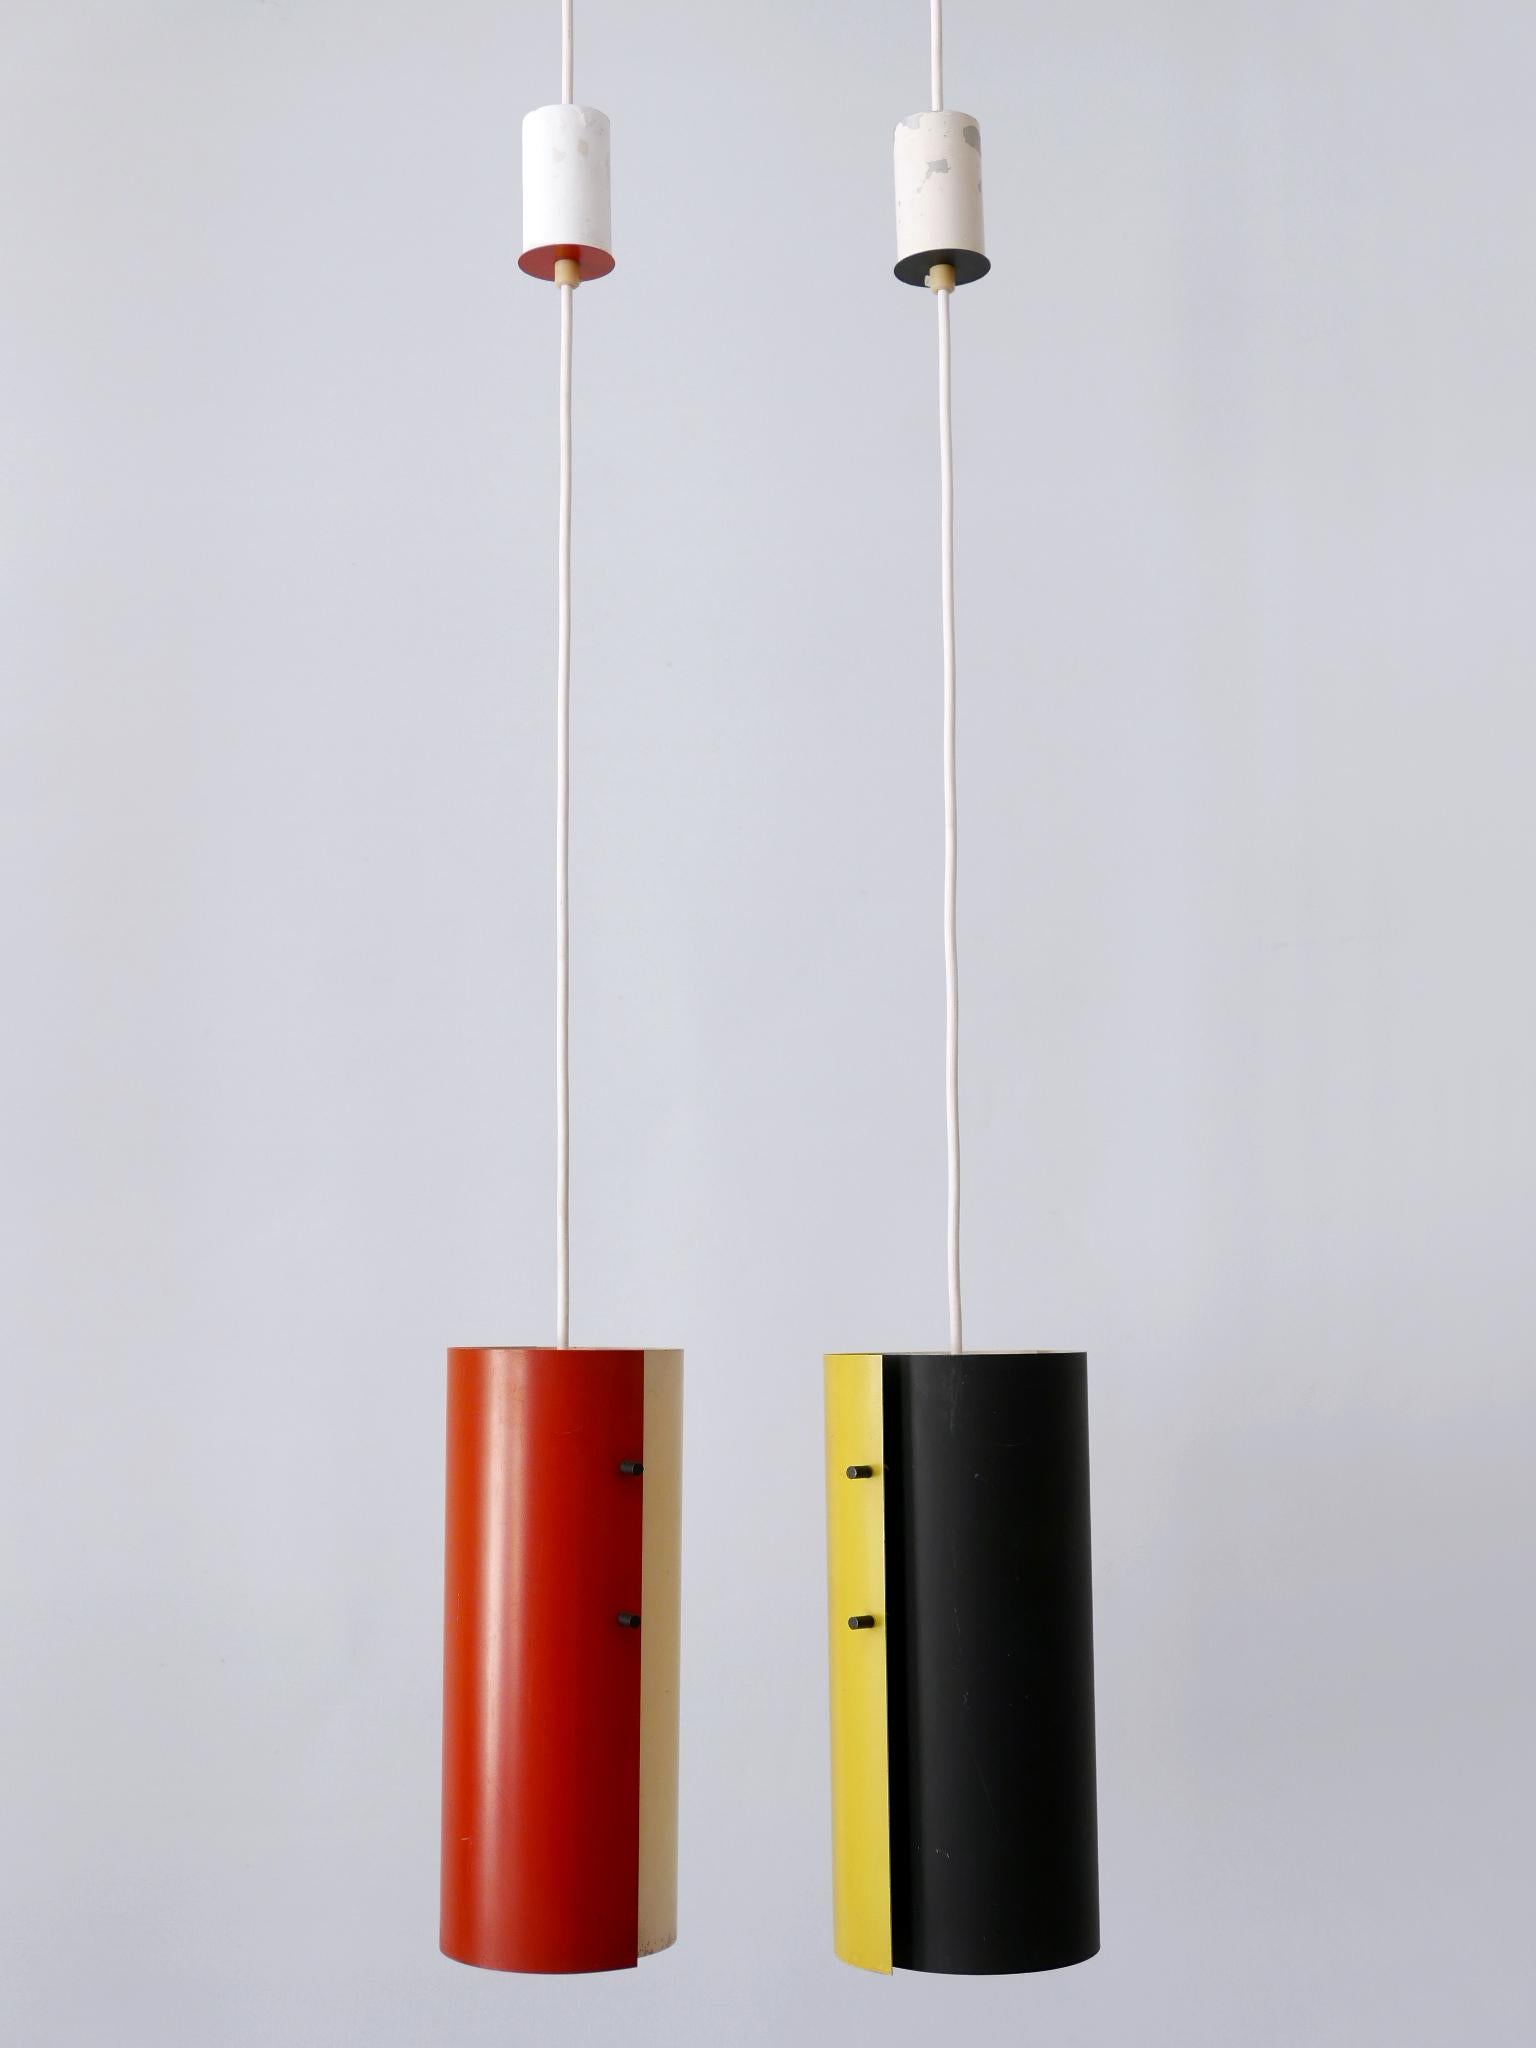 Elegant and highly decorative Mid-Century Modern bi-color metal pendant lamps or hanging lights. Designed & manufactured probably in Germany, 1960s.

Executed in white, yellow, black and red painted metal sheet and brass, each pendant lamp needs 1 x